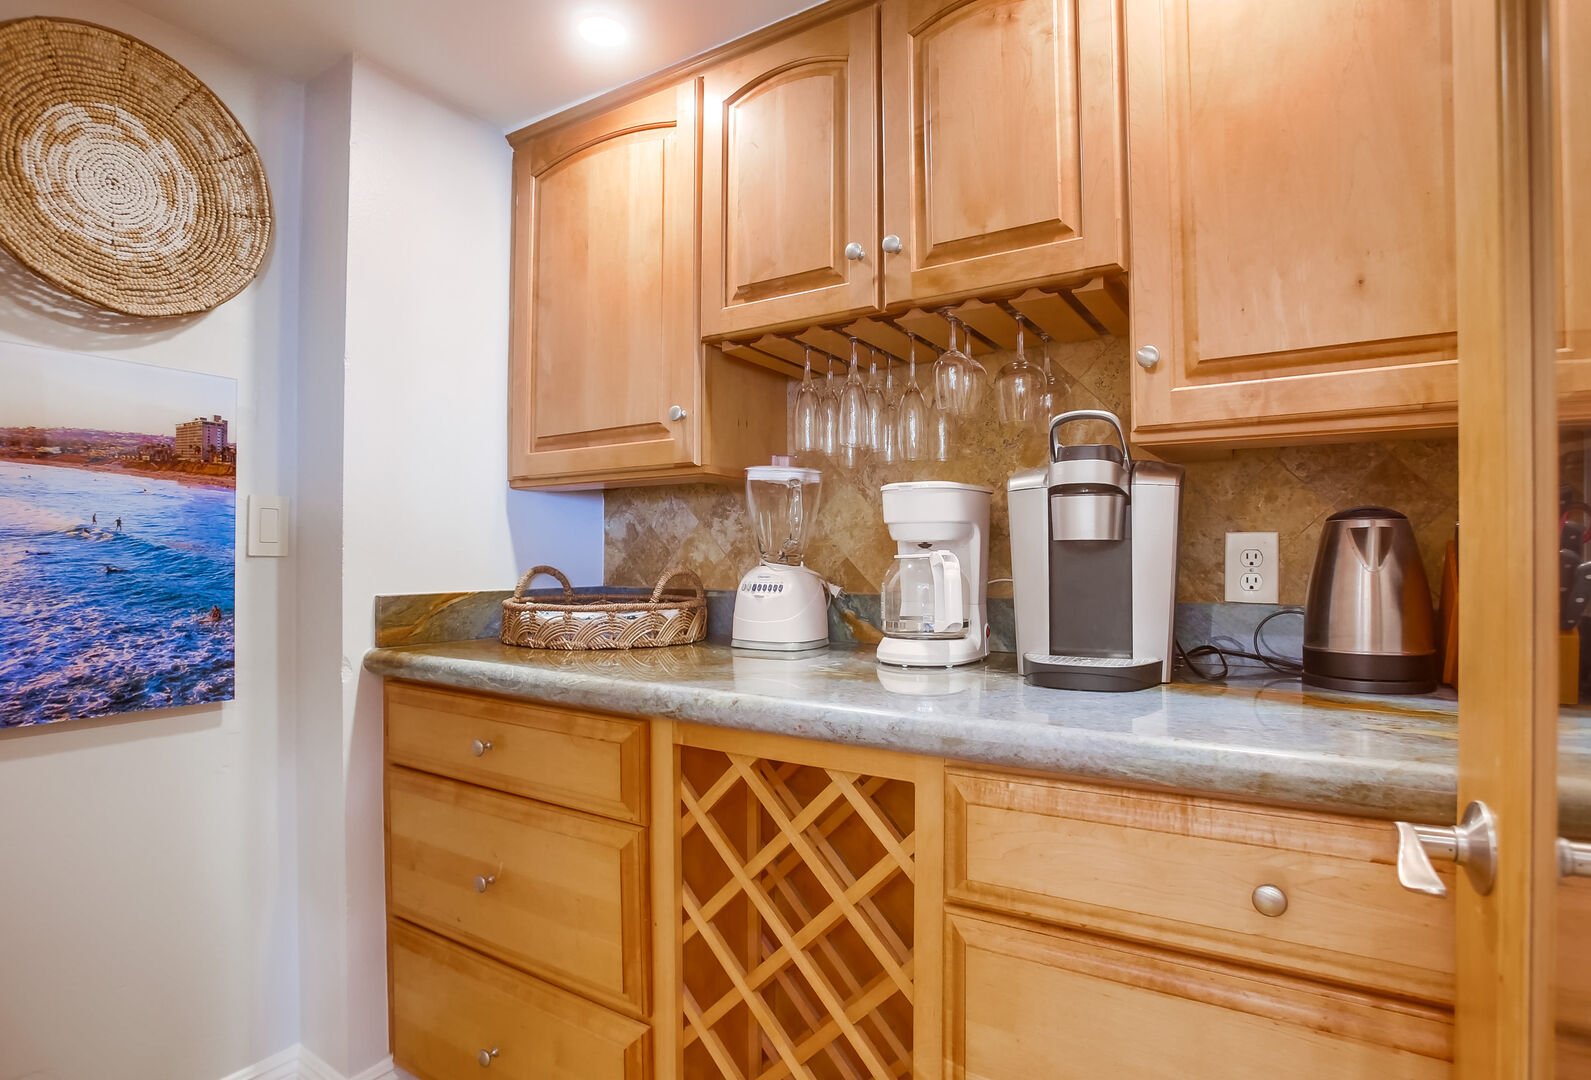 Pantry with storage space and wine rack. Additional kitchen small appliances like a standard and Keurig coffee maker, tea pot, blender and more!